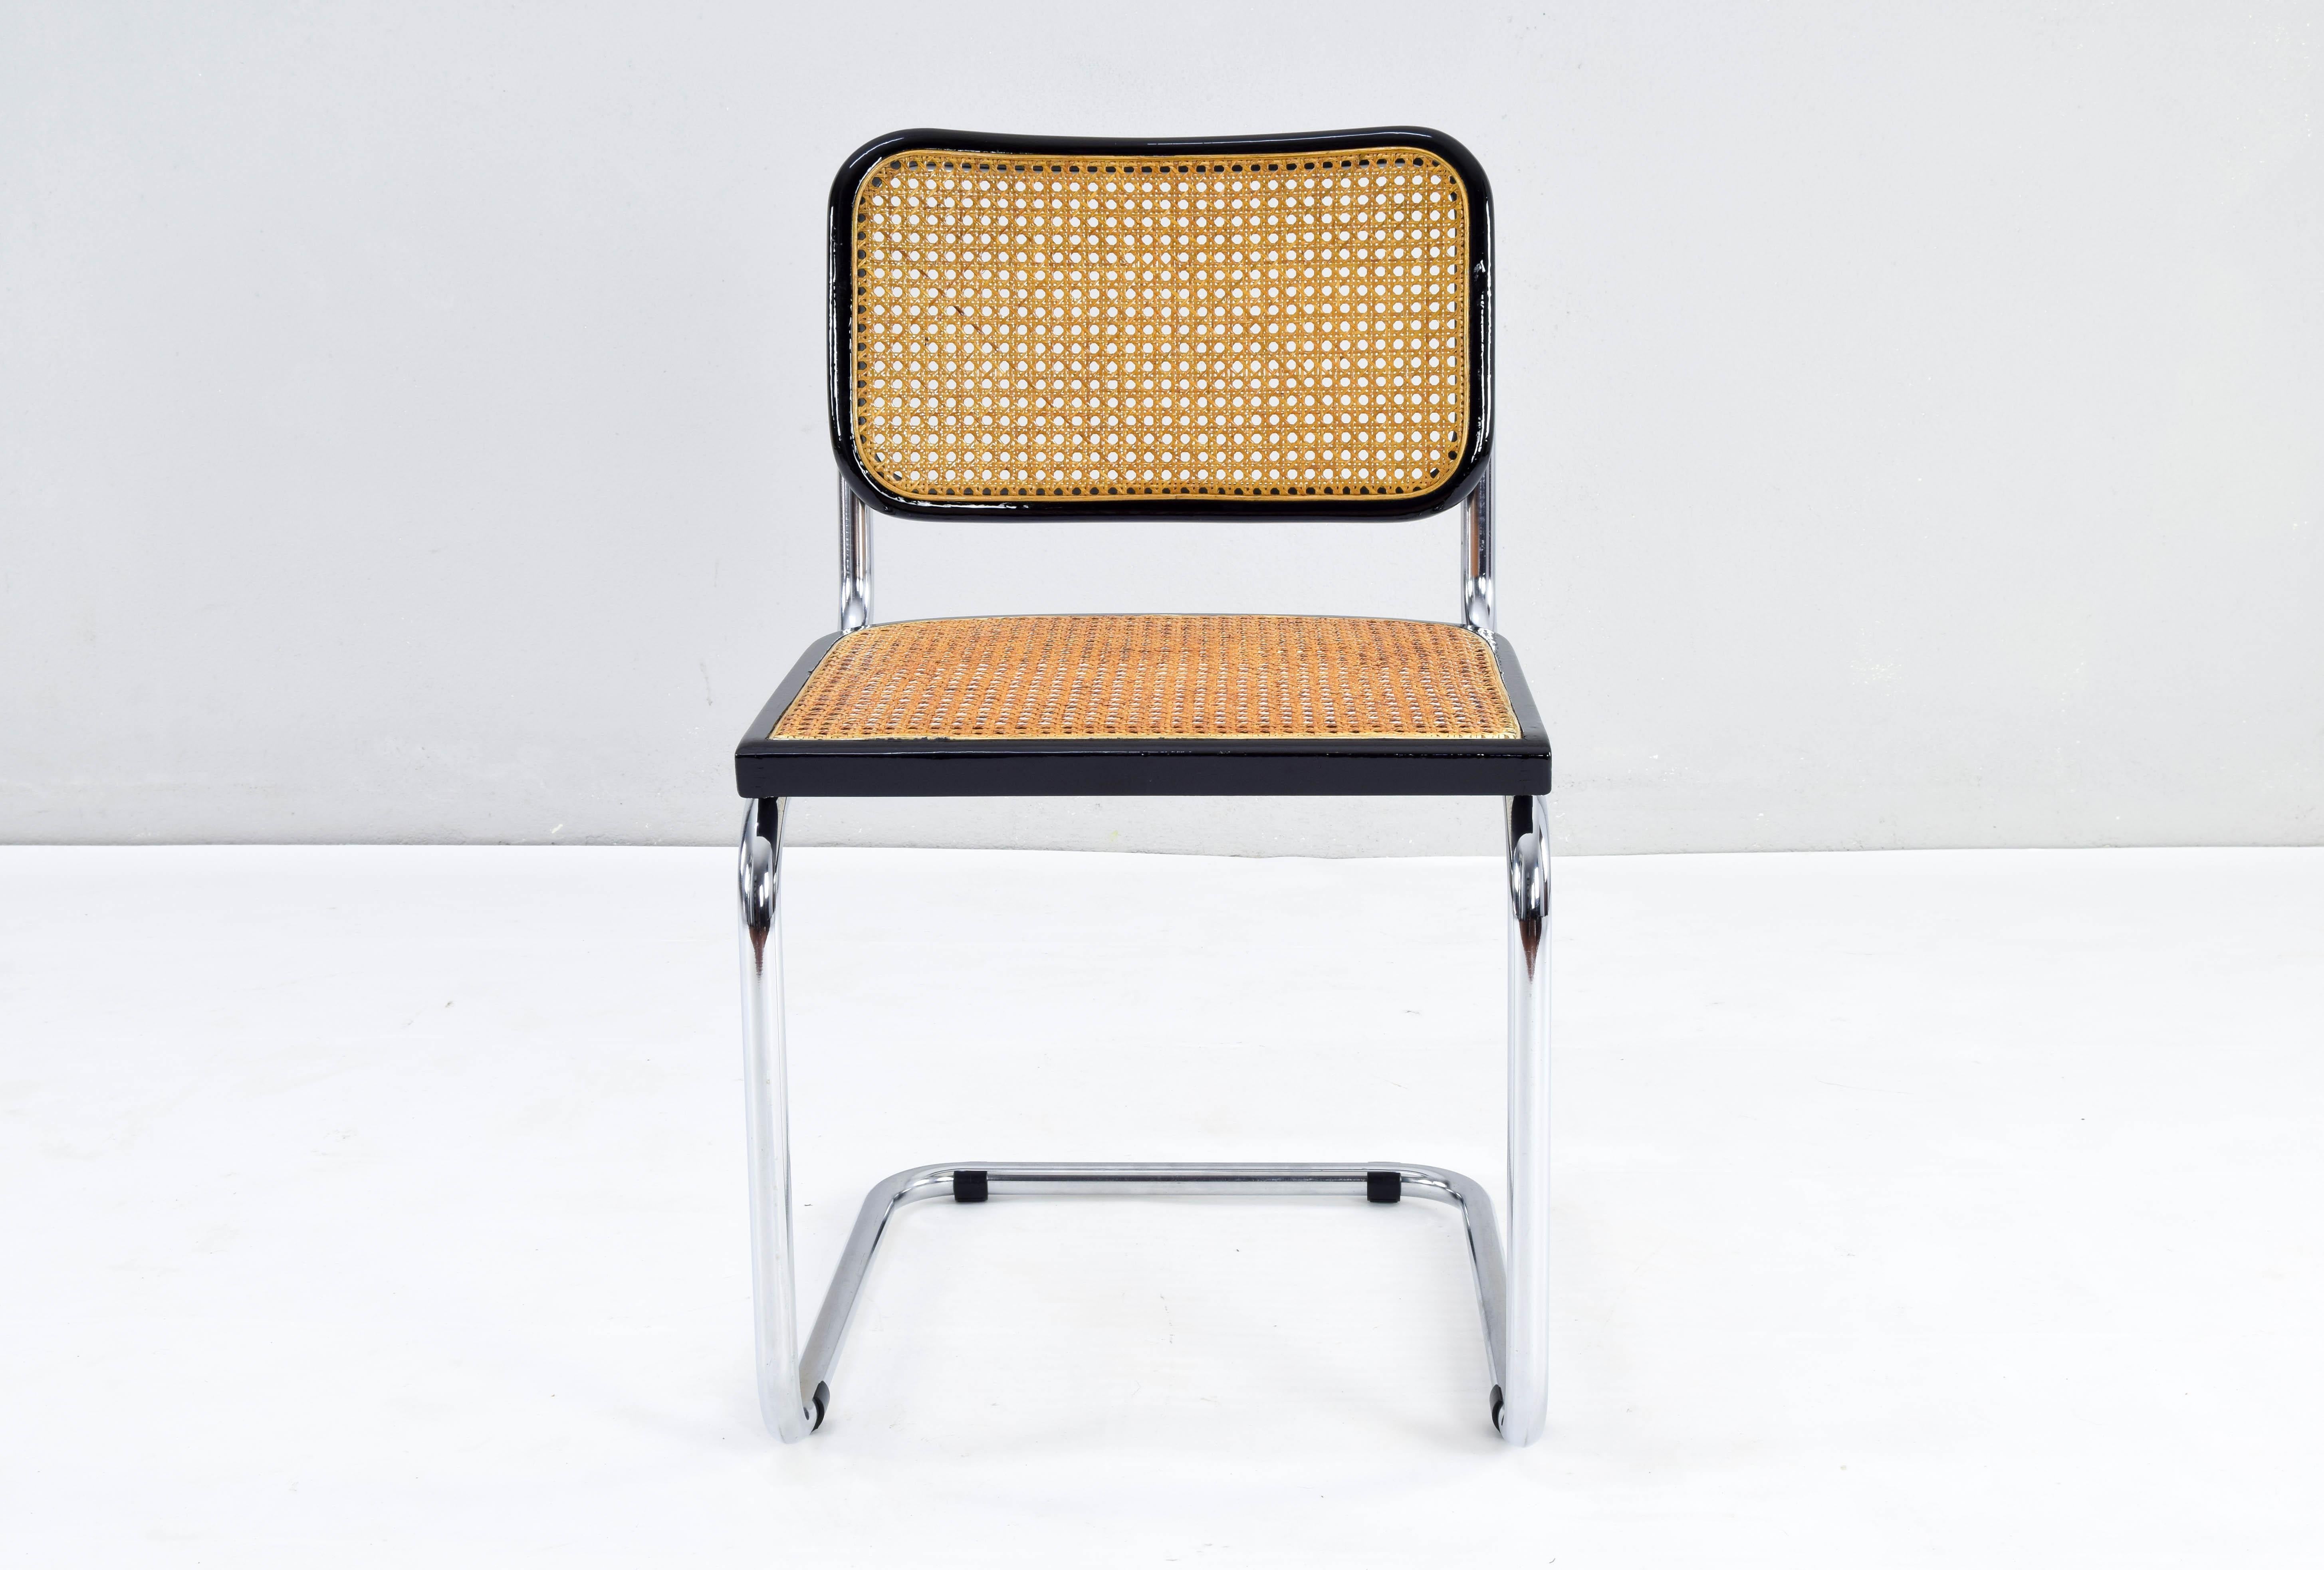 Cesca chair, model B32, Italy in the 1970s. This chair are part of a high quality edition.

Chrome tubular structure in very good condition. Beech wood frames lacquered in black and Viennese natural grid. The natural fiber grille of the seat have